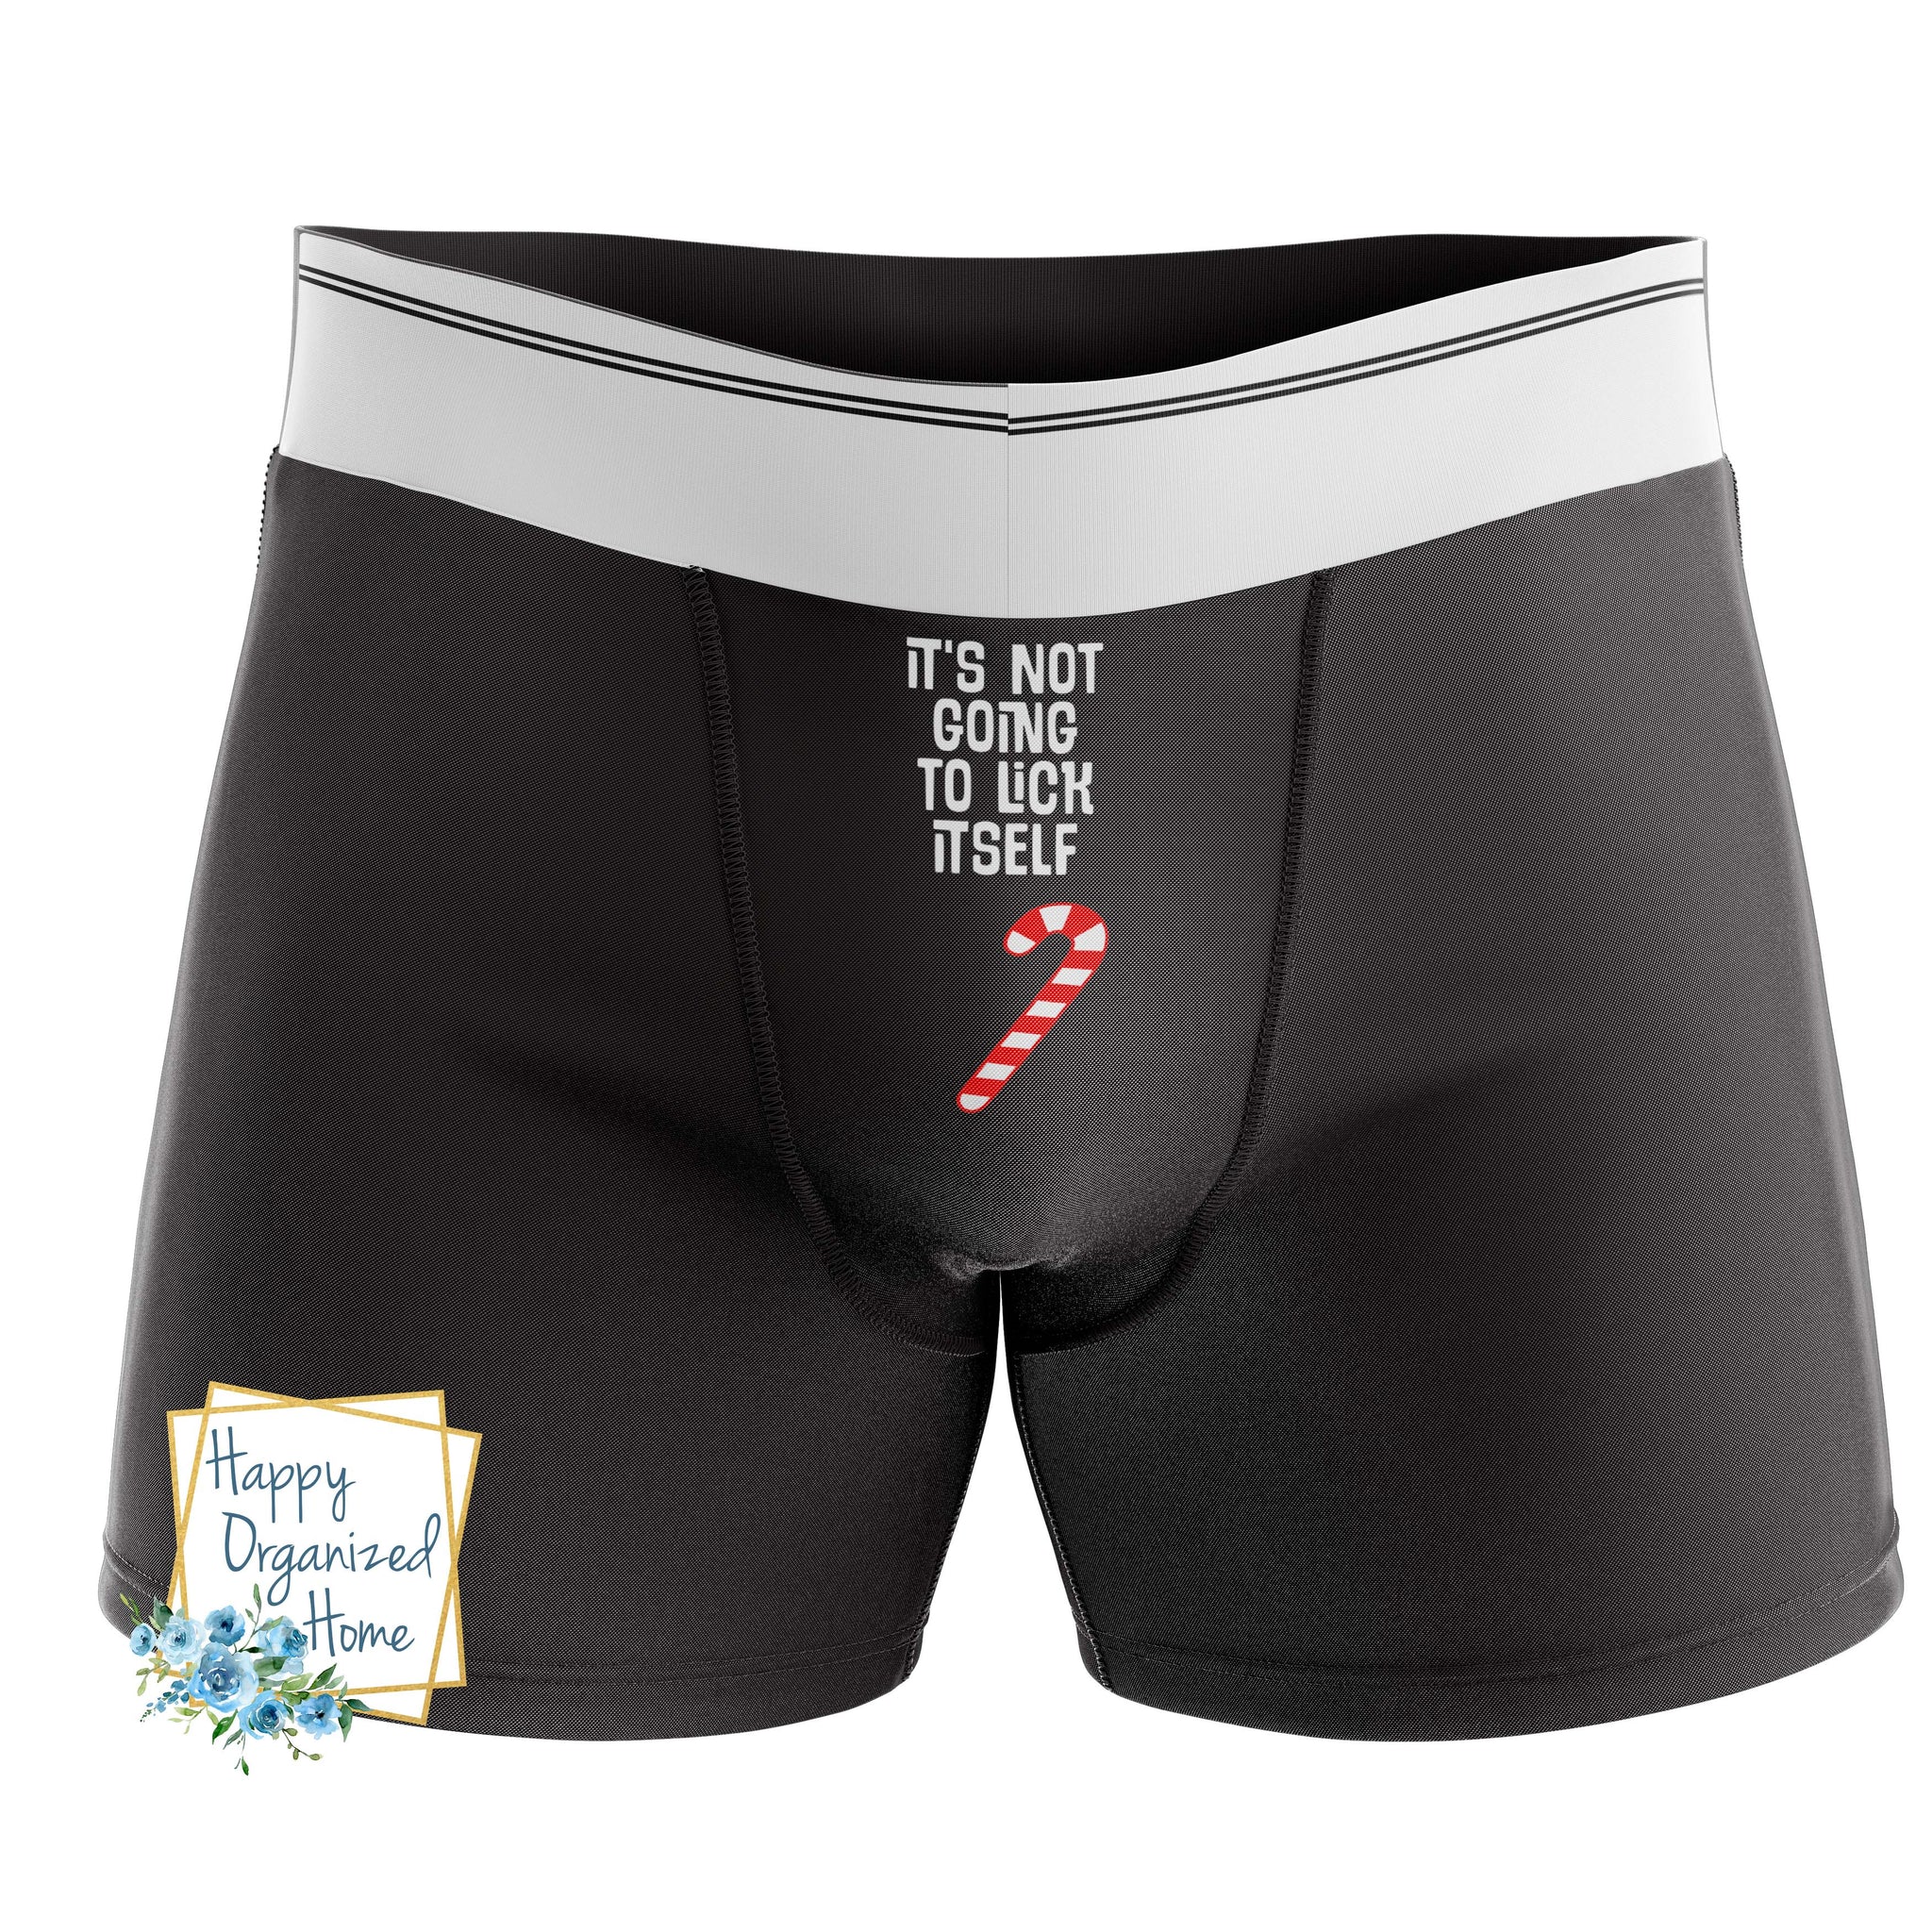 It's not going to lick itself Candy Cane - Men's Naughty Boxer Briefs –  Happy Organized Home